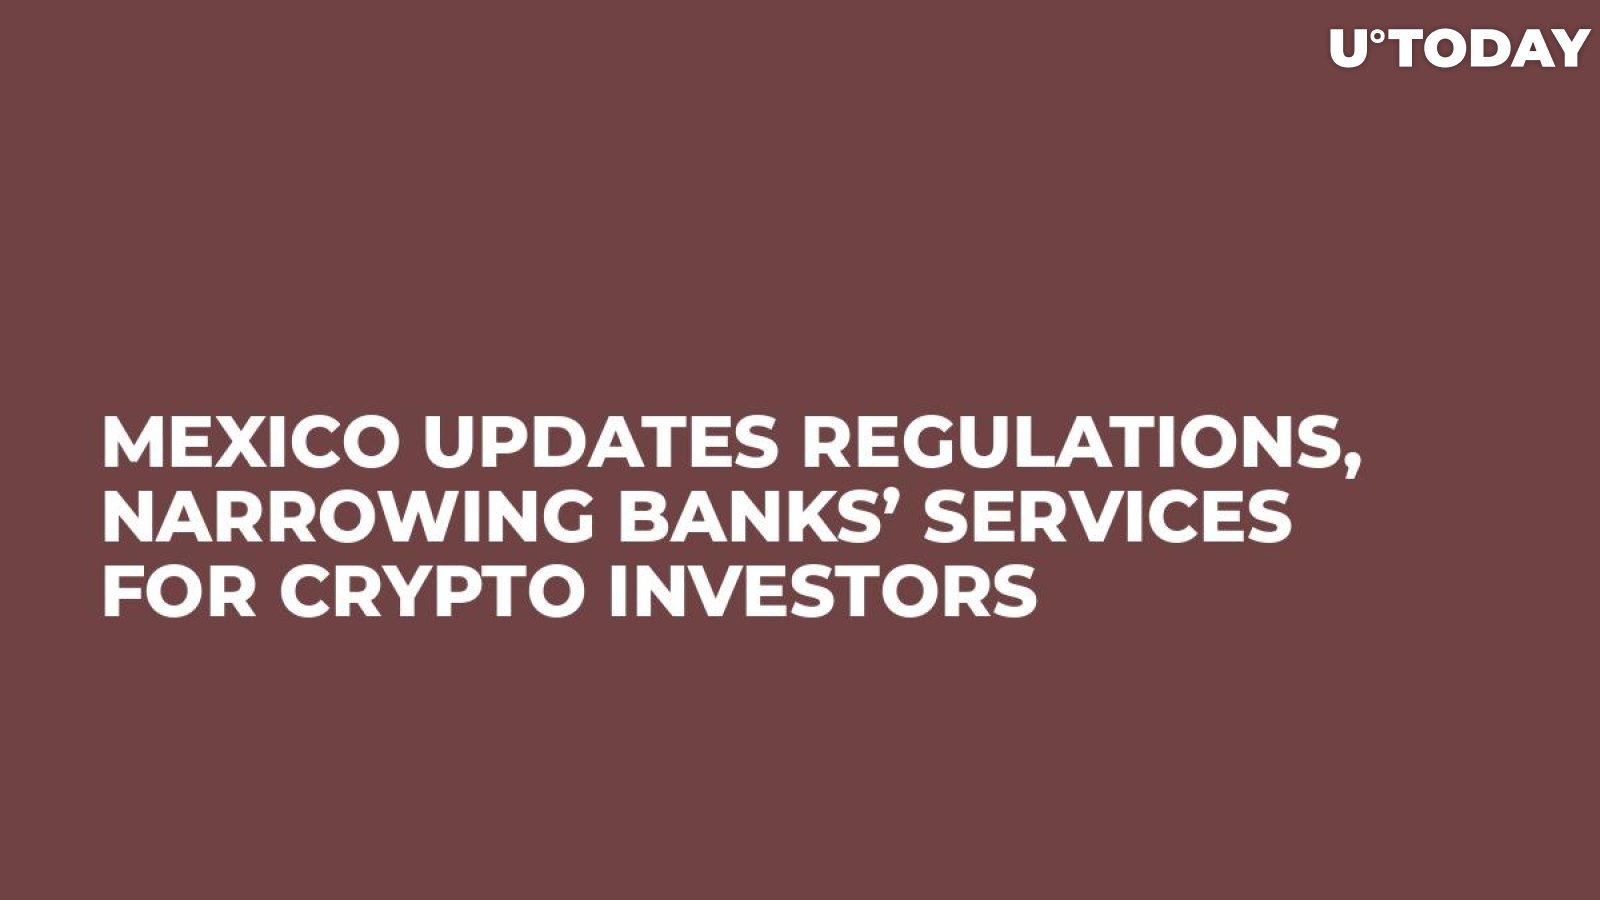 Mexico Updates Regulations, Narrowing Banks’ Services for Crypto Investors